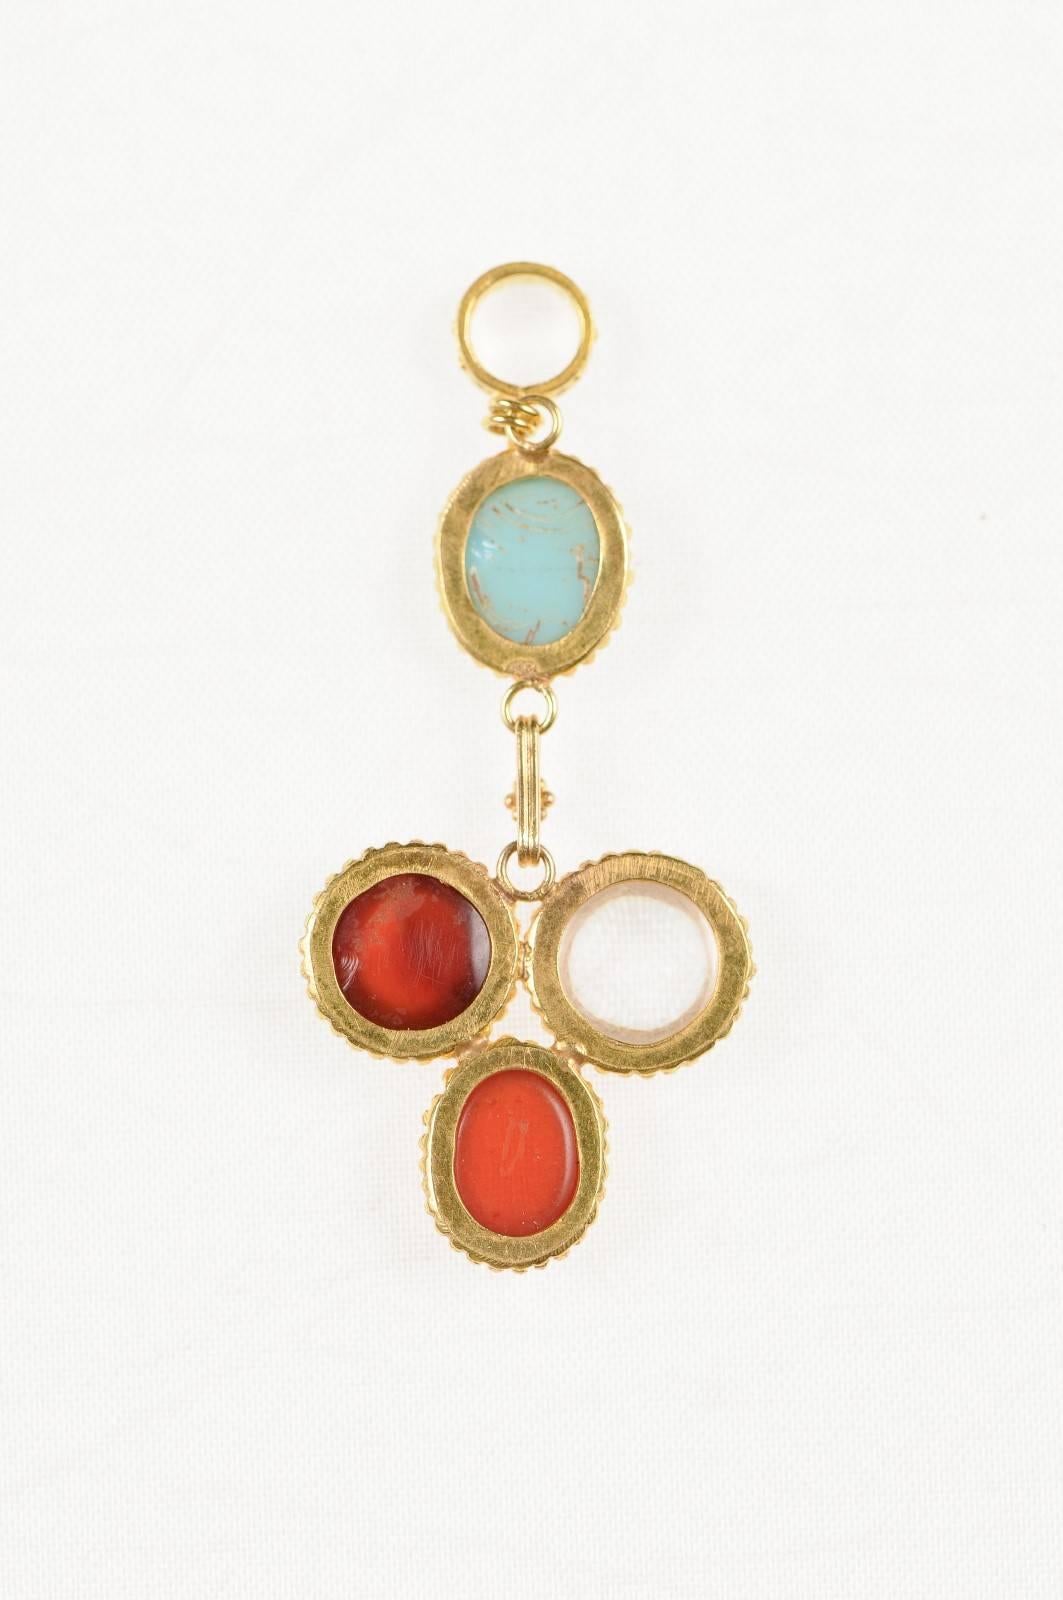 Lovely Multicolored Drop Necklace Pendant of Old Roman Glass '400 AD-500 AD' For Sale 3